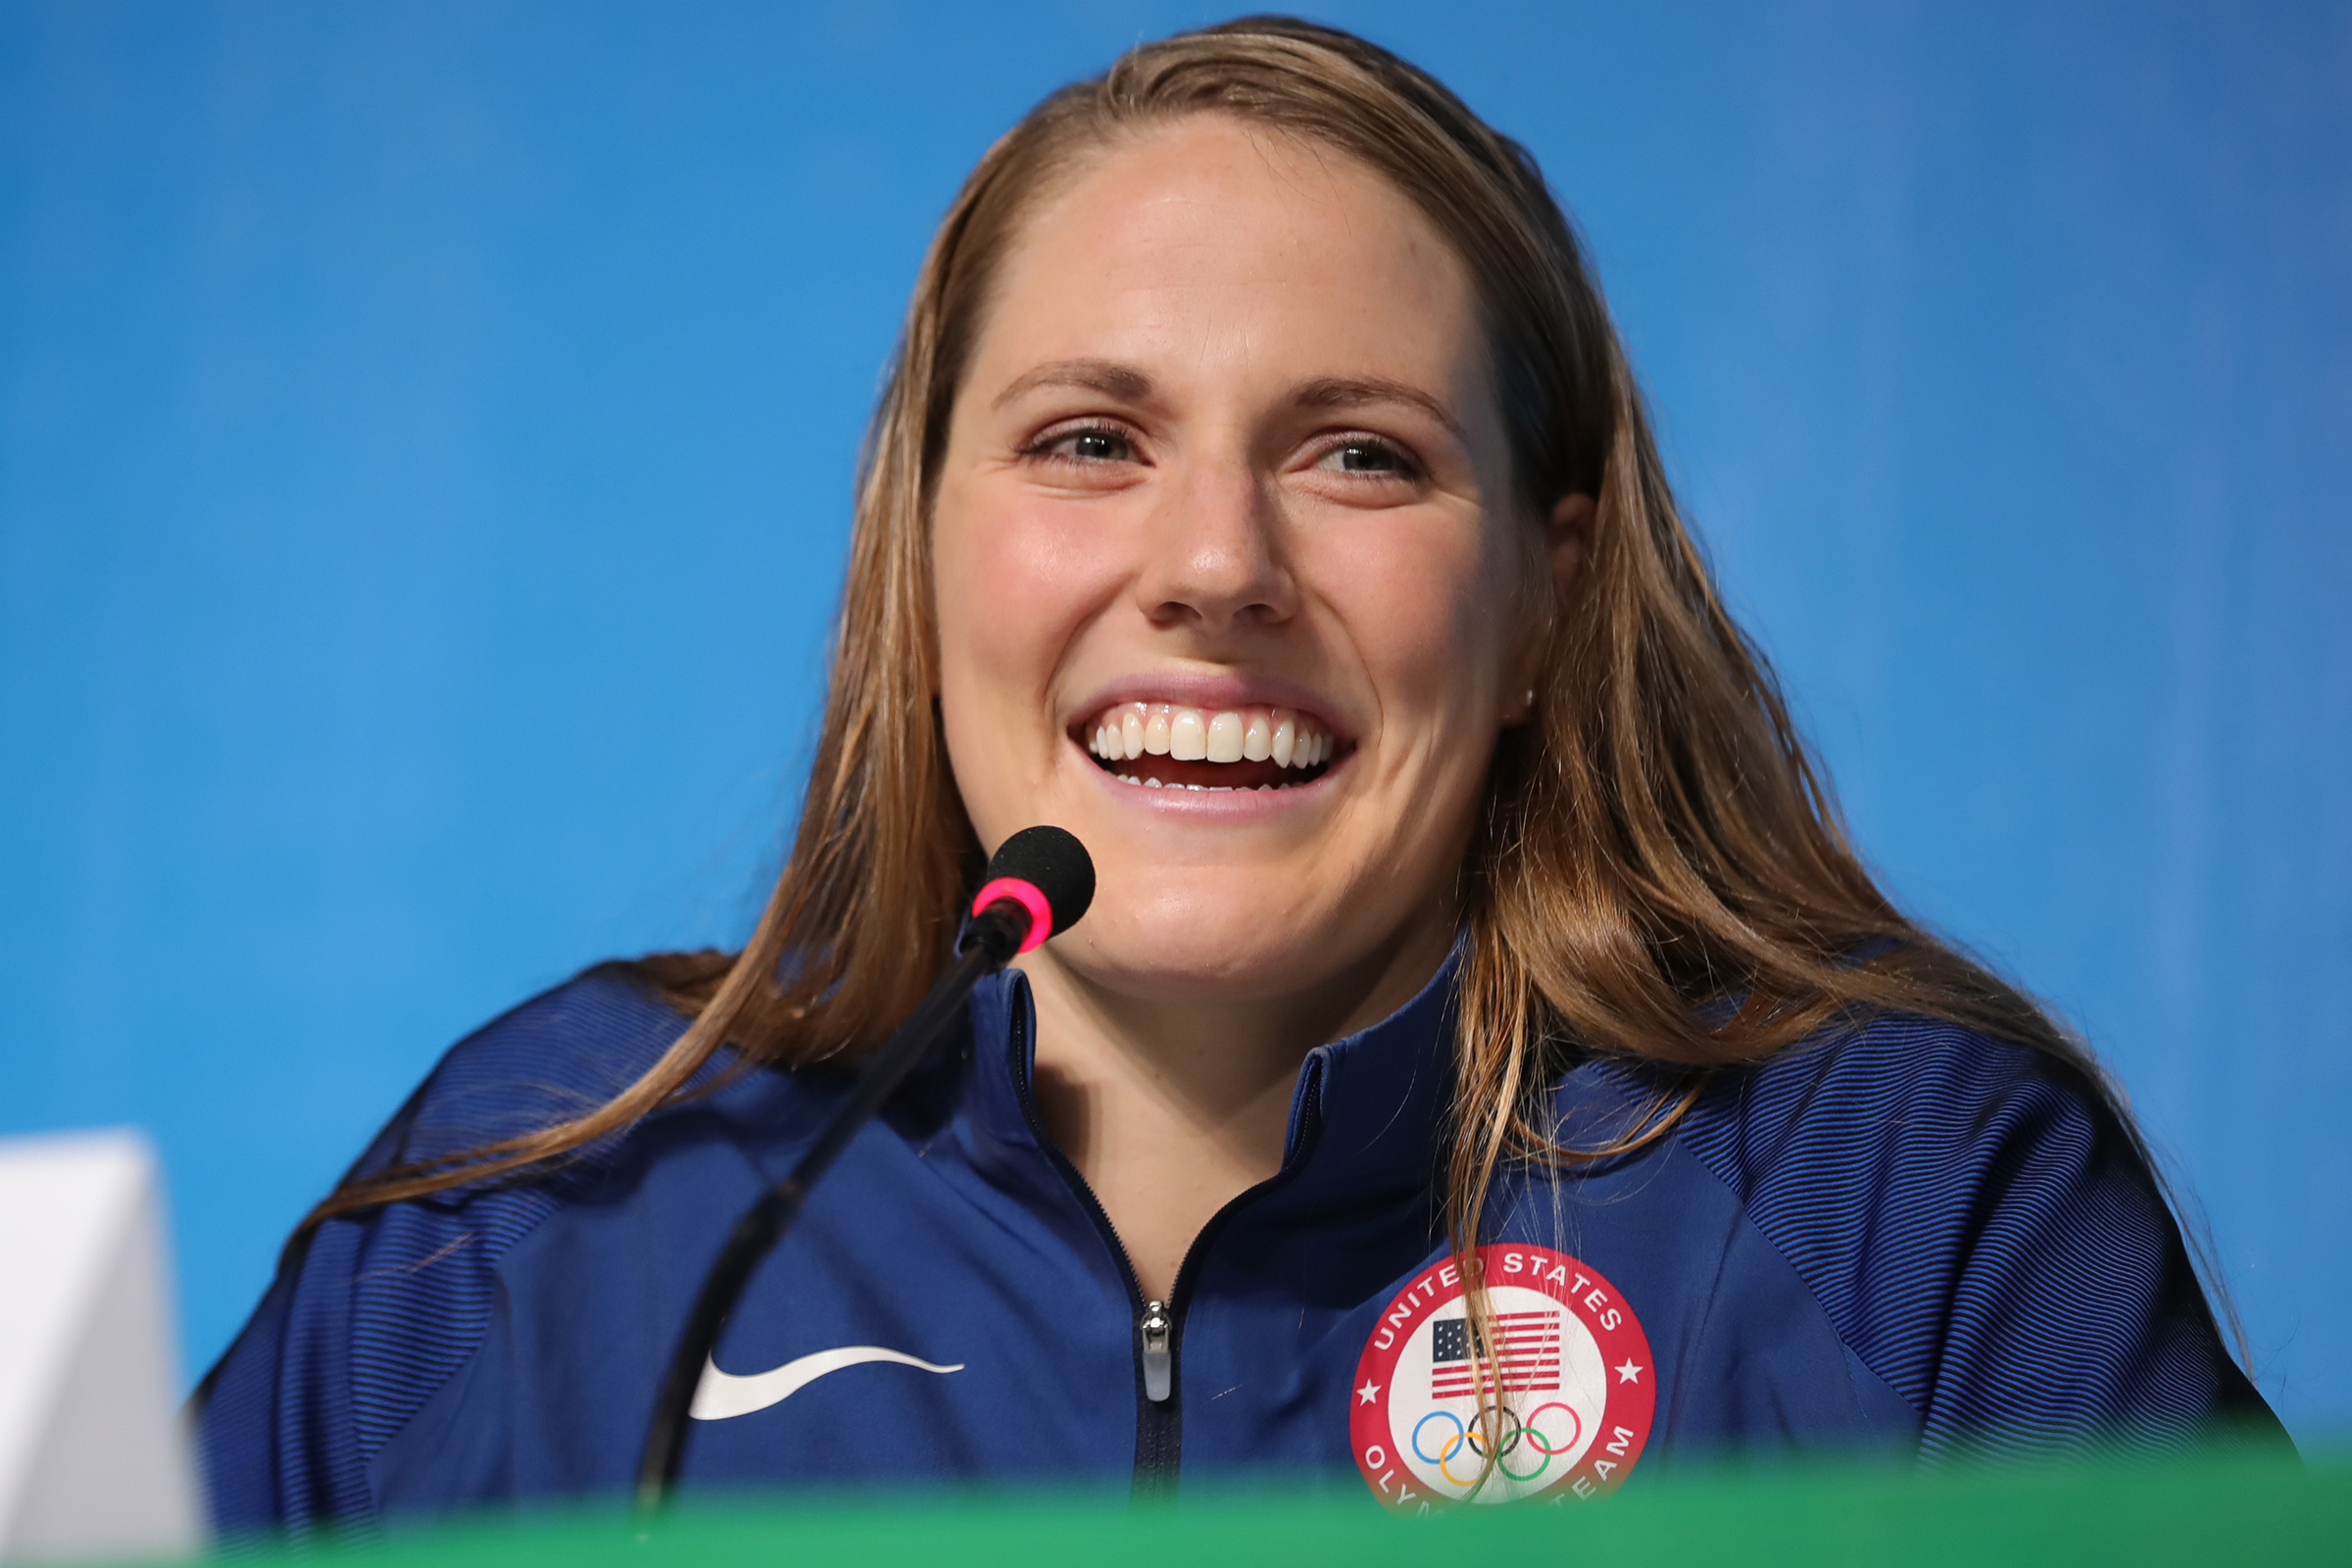 Missy Franklin (USA), is seen during the Swimming Press Conference of team USA at the MPC (Main Press Centre) at Olympic Park Barra prior to the Rio 2016 Olympic Games in Rio de Janeiro, Brazil, 3 August 2016. Rio 2016 Olympic Games take place from 05 to 21 August. Photo: Michael Kappeler/dpa